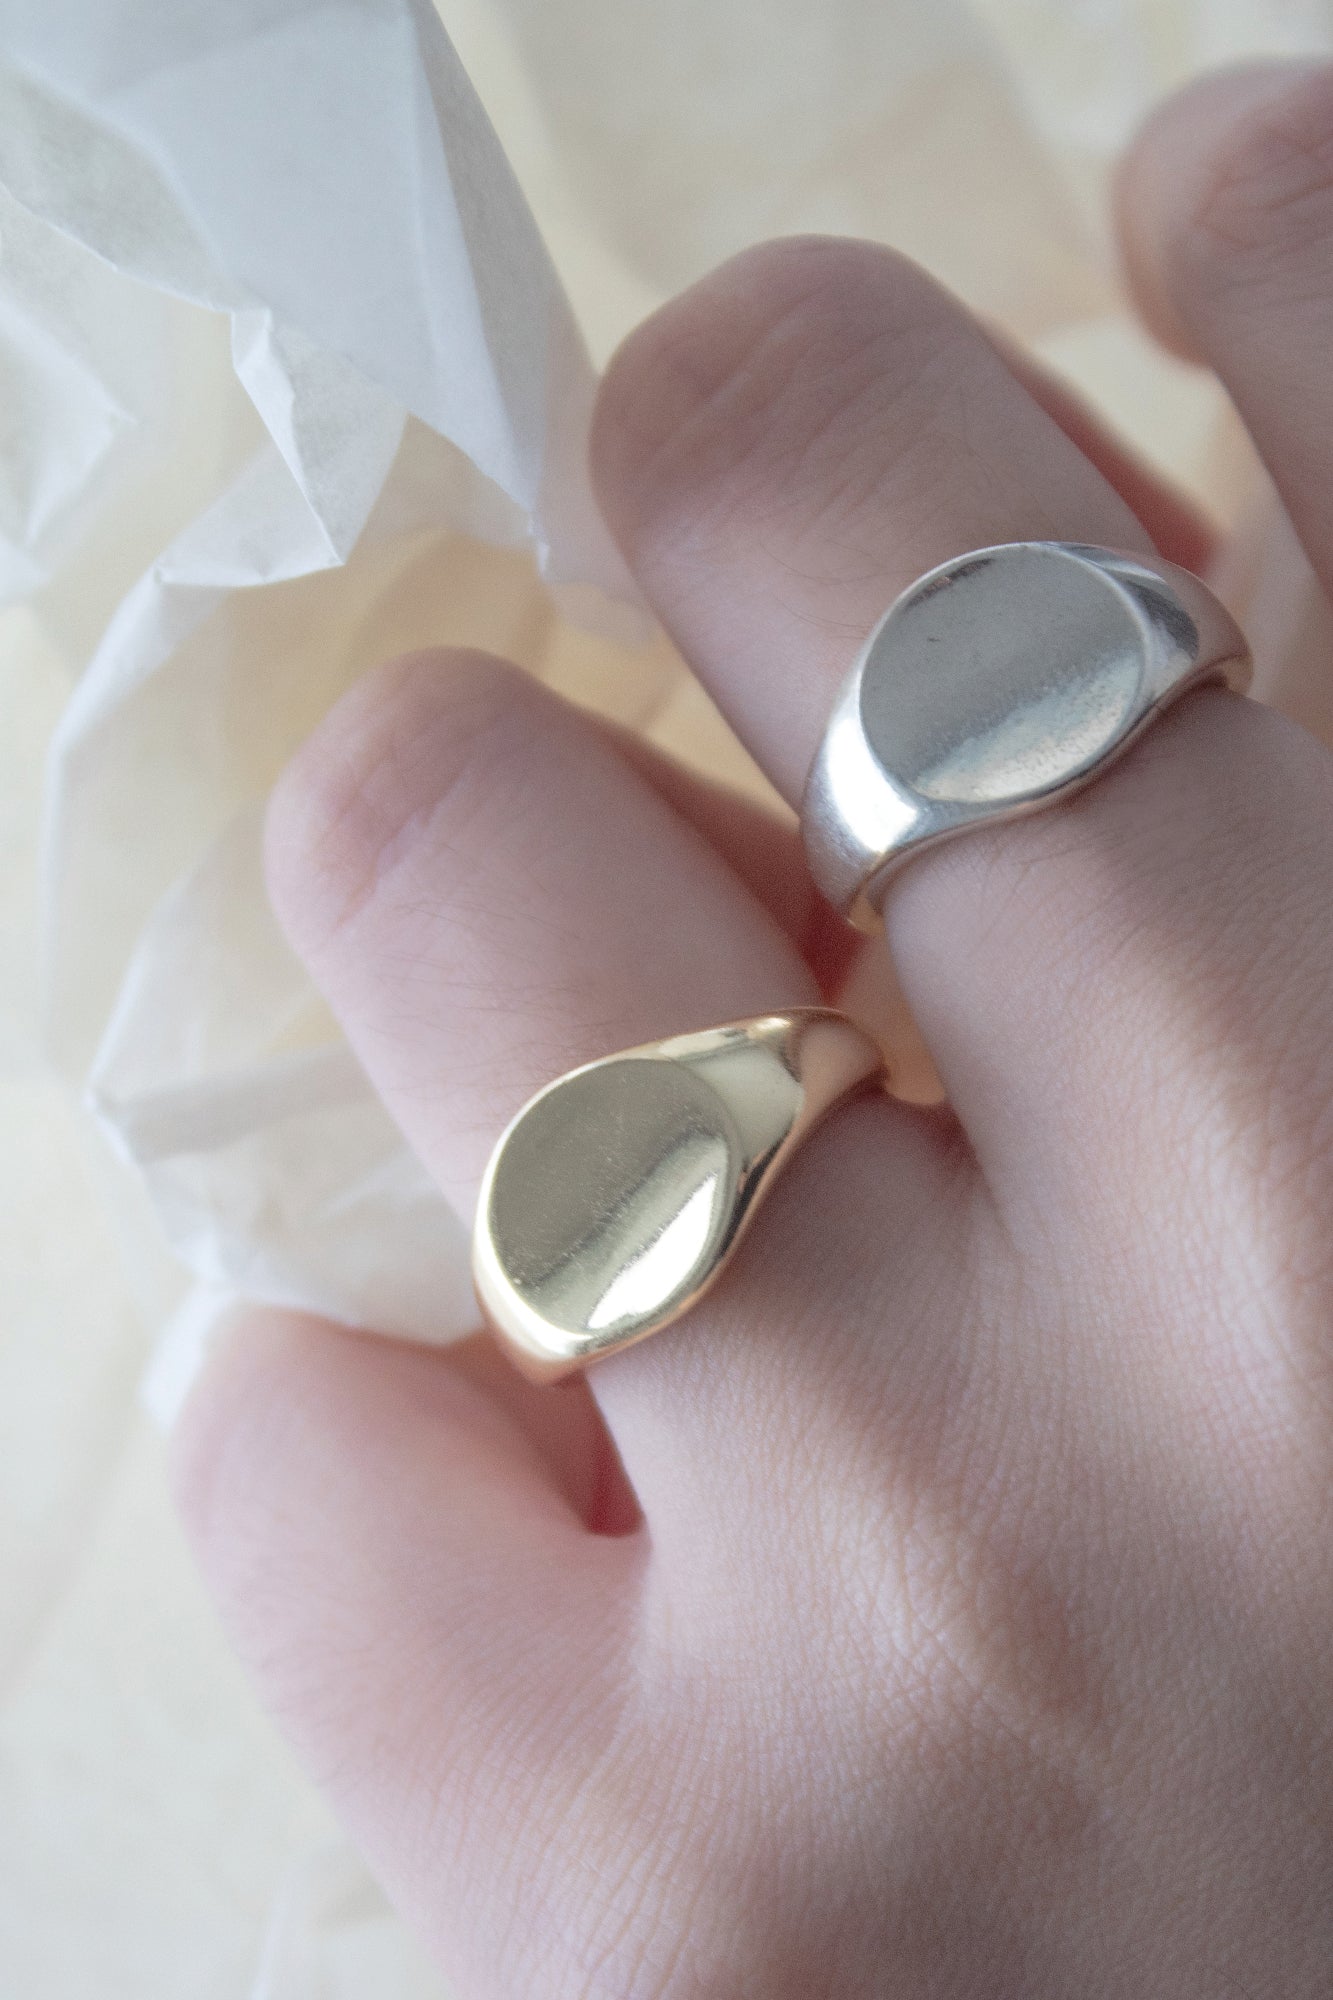 Geometric circle ring in Sterling Silver